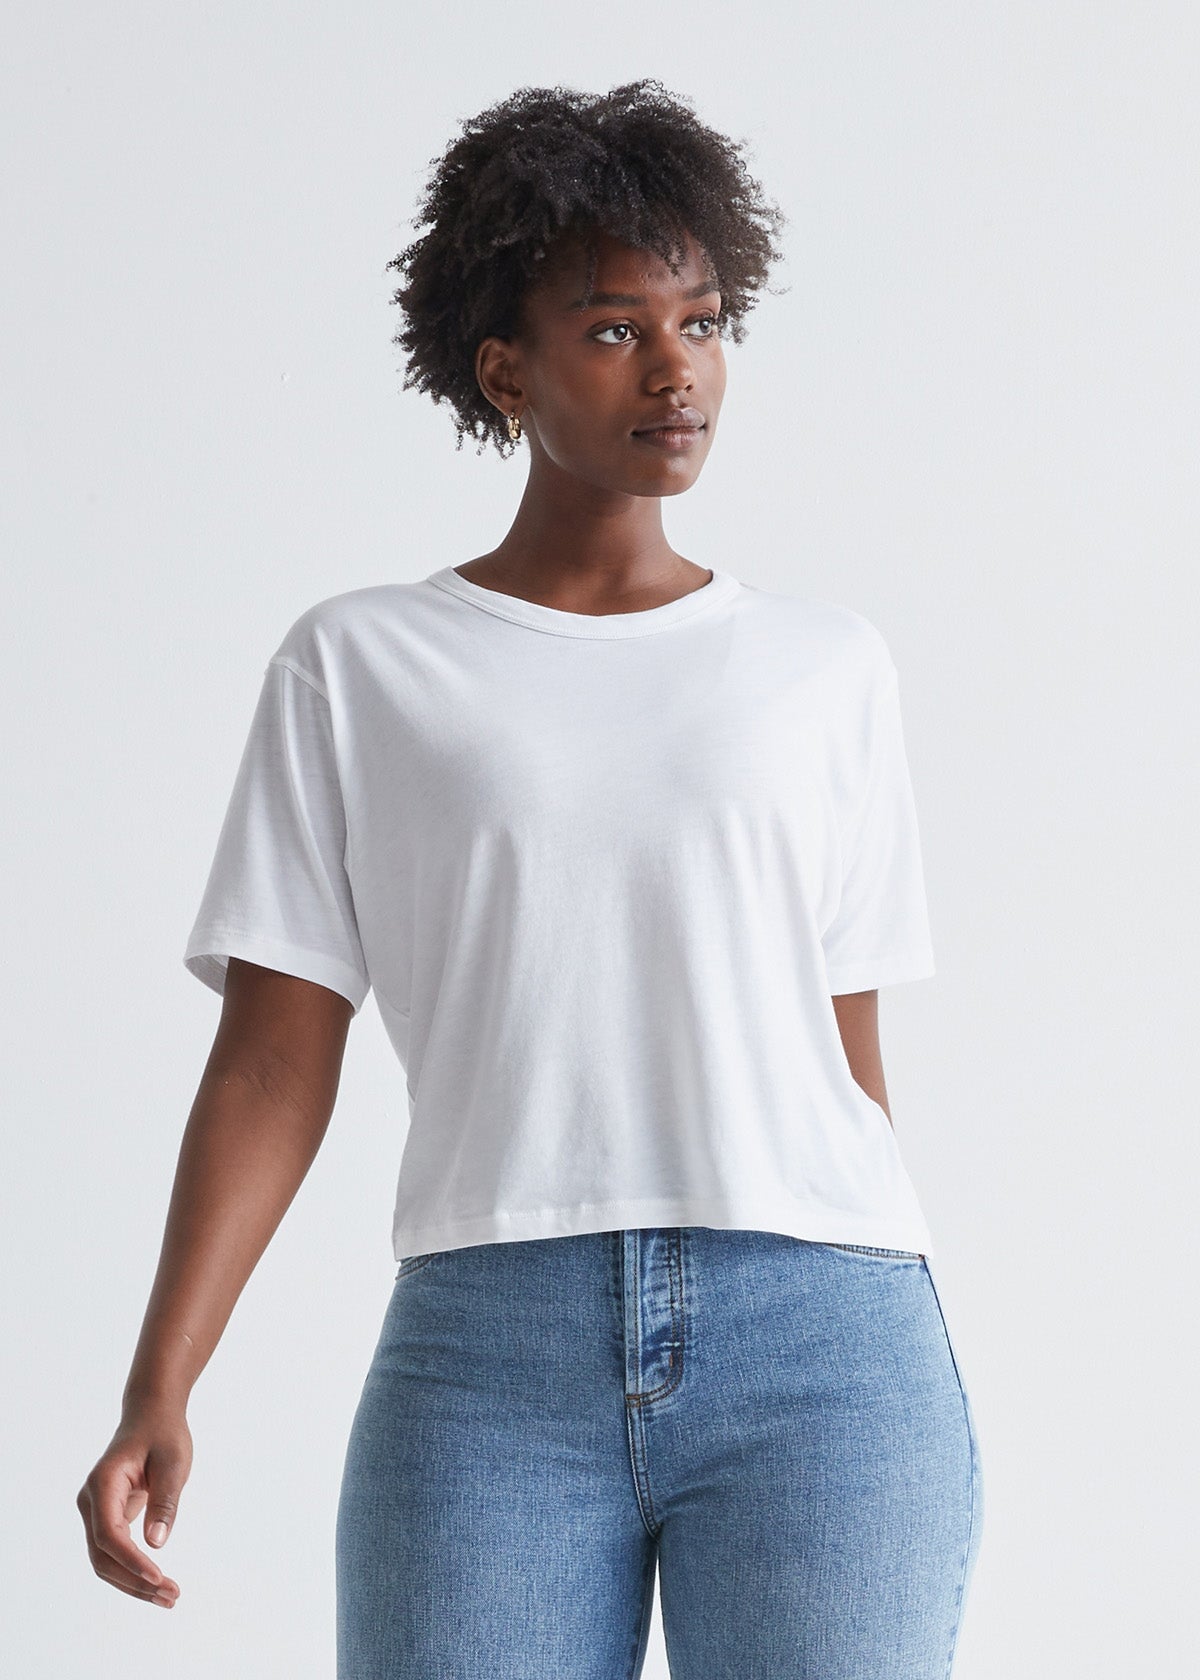 Discover the Latest Trends in Women's Tops at StyleWe